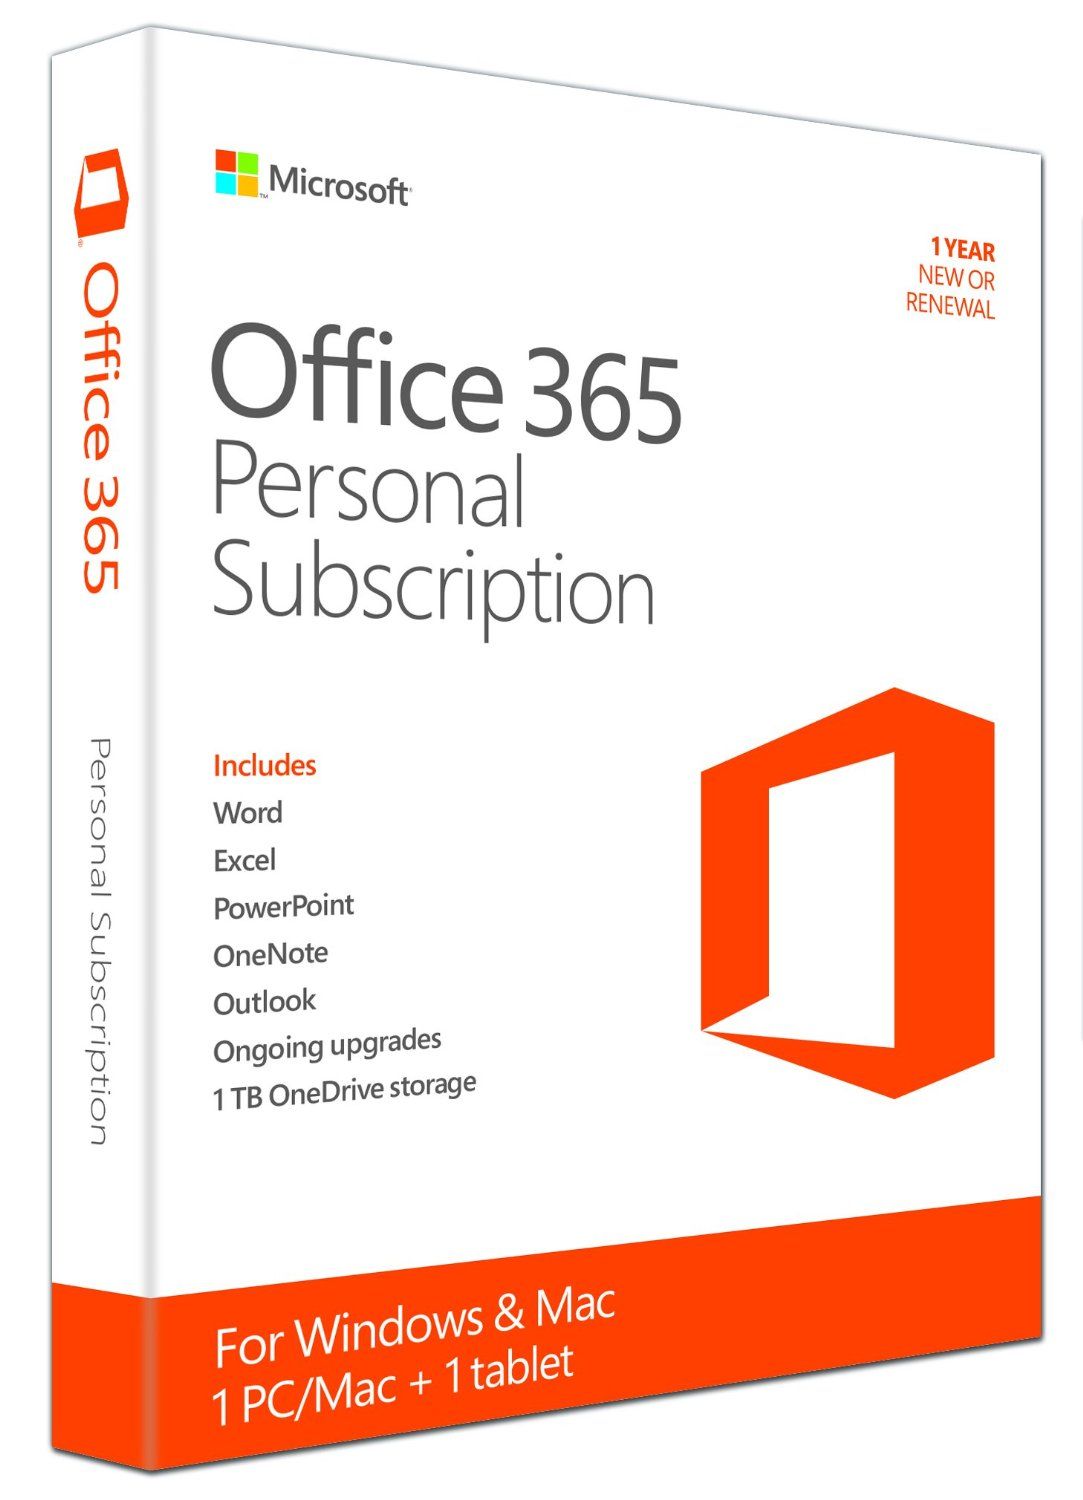 I purchased office 365 for mac